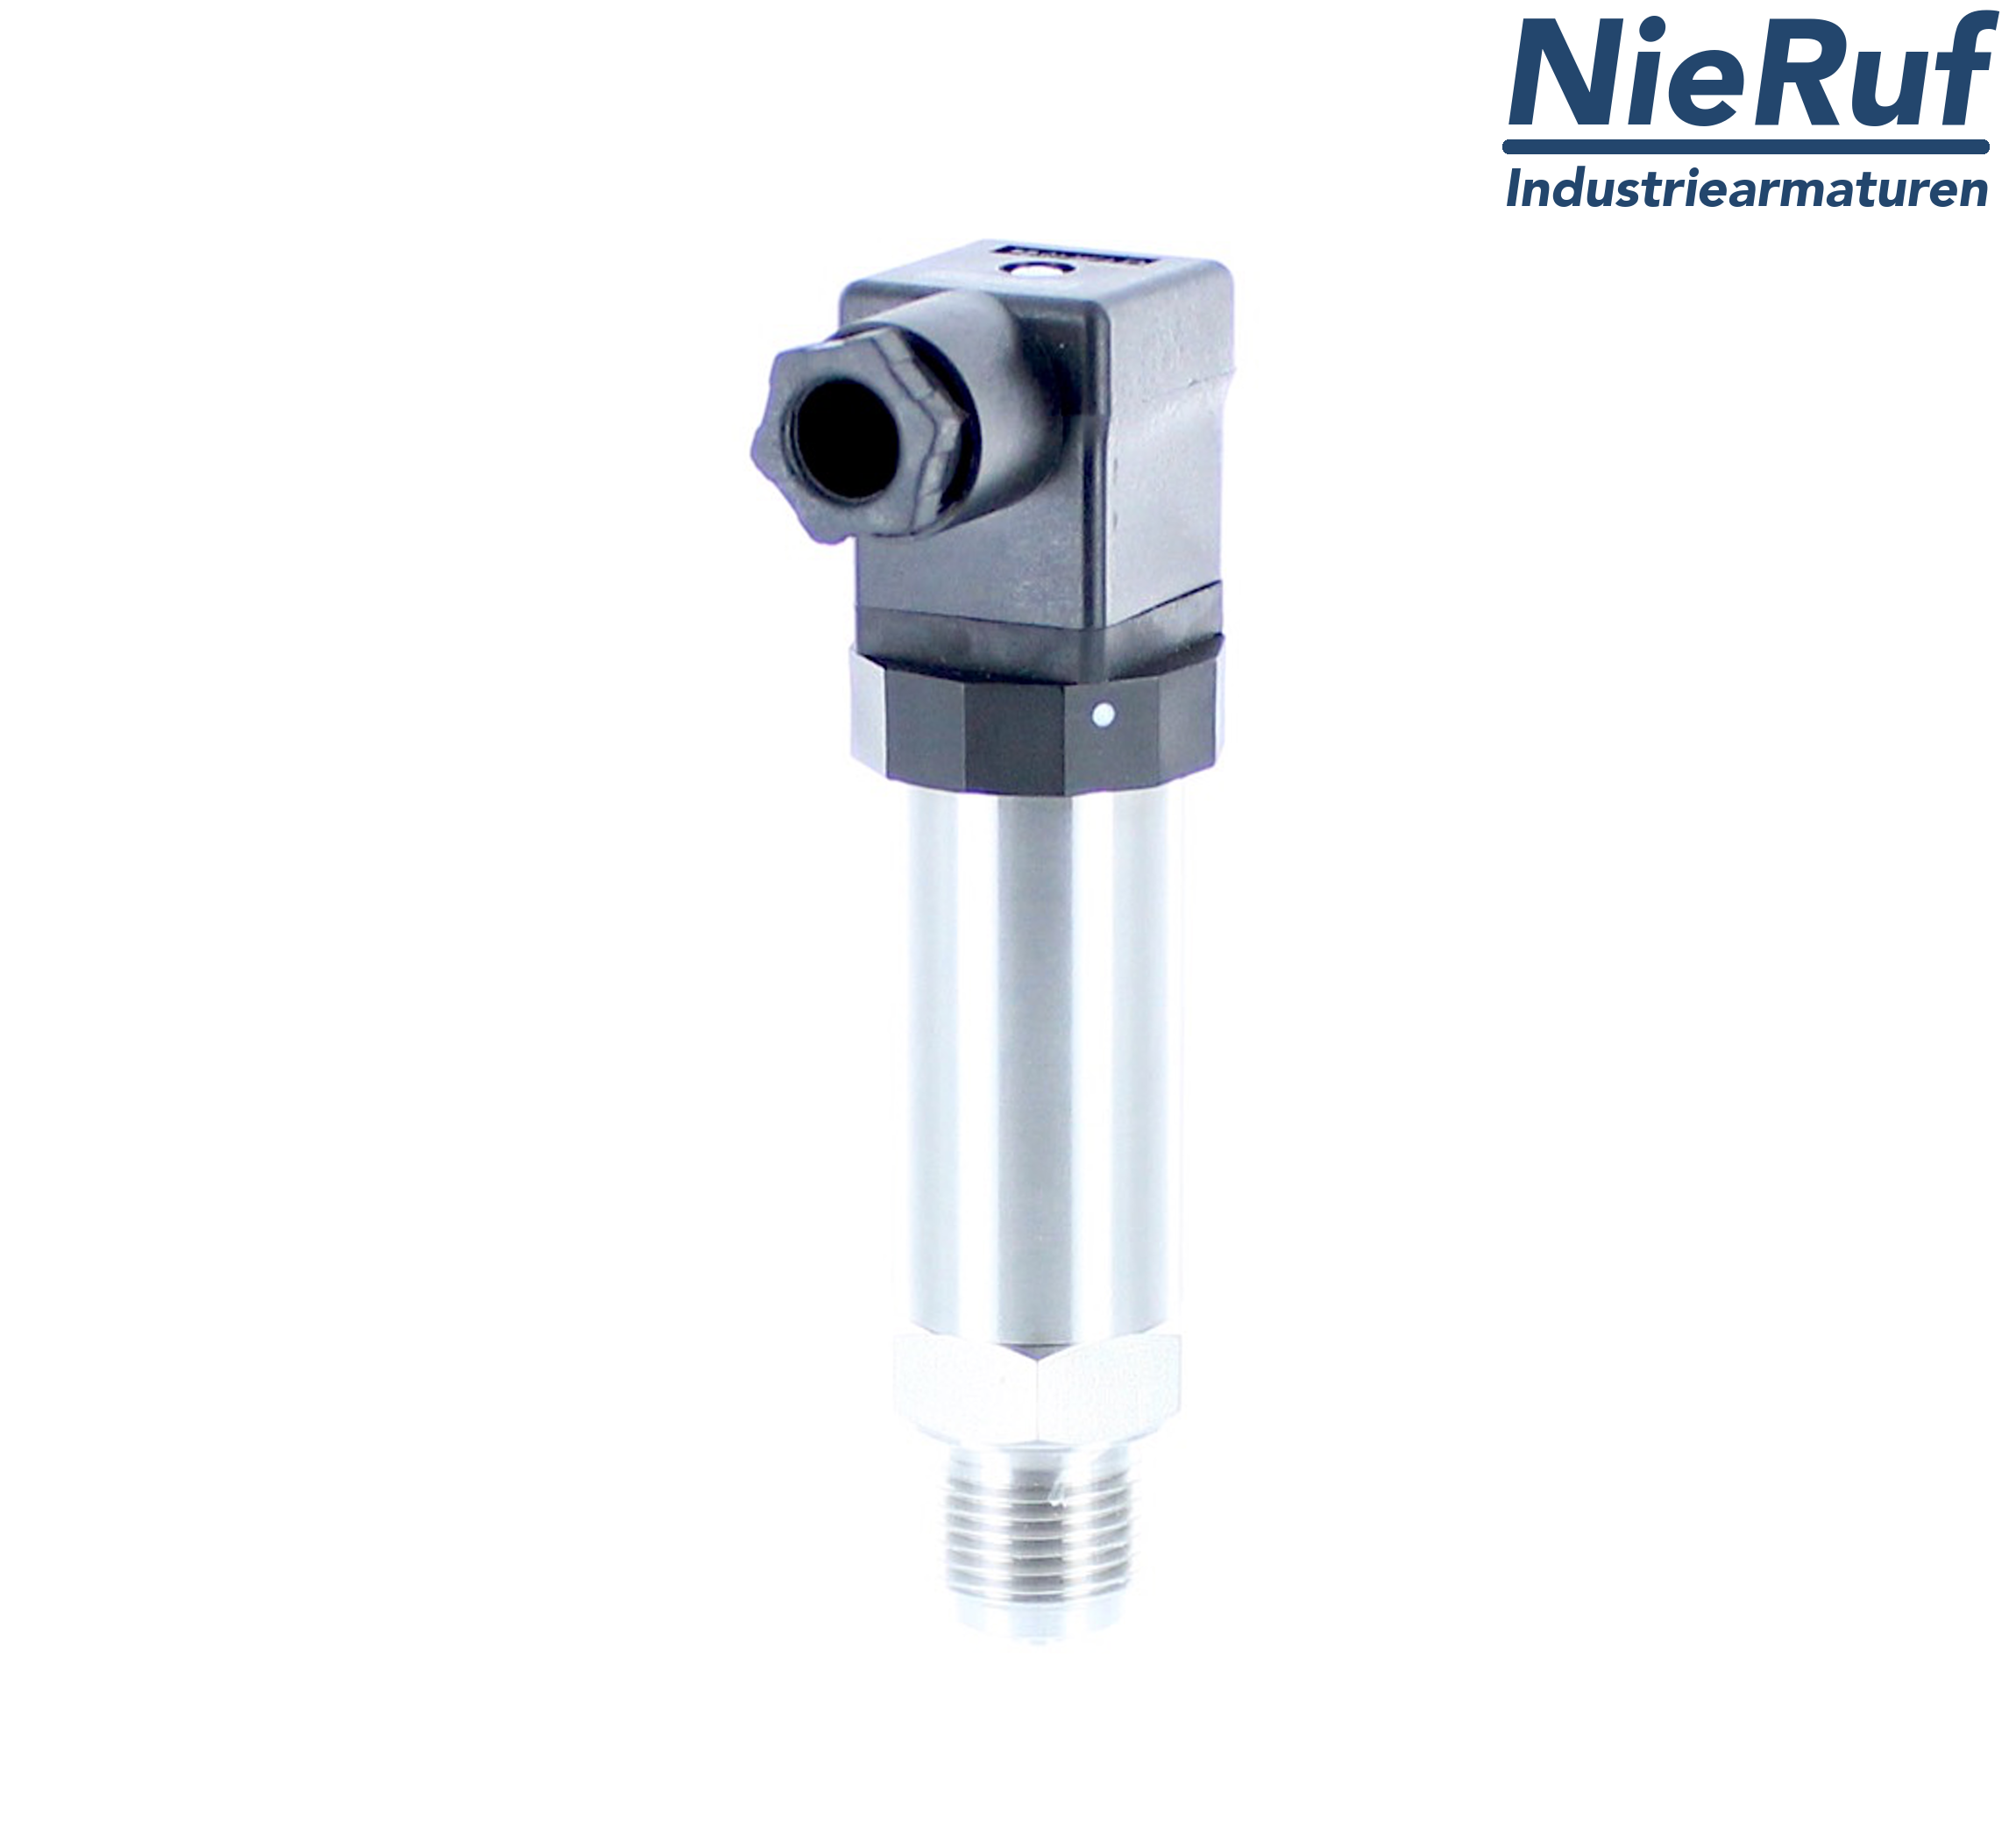 pressure sensor G 1/4" B DS01 stainless steel 2-wire: 4-20mA FPM 0,0 - 6,0 bar